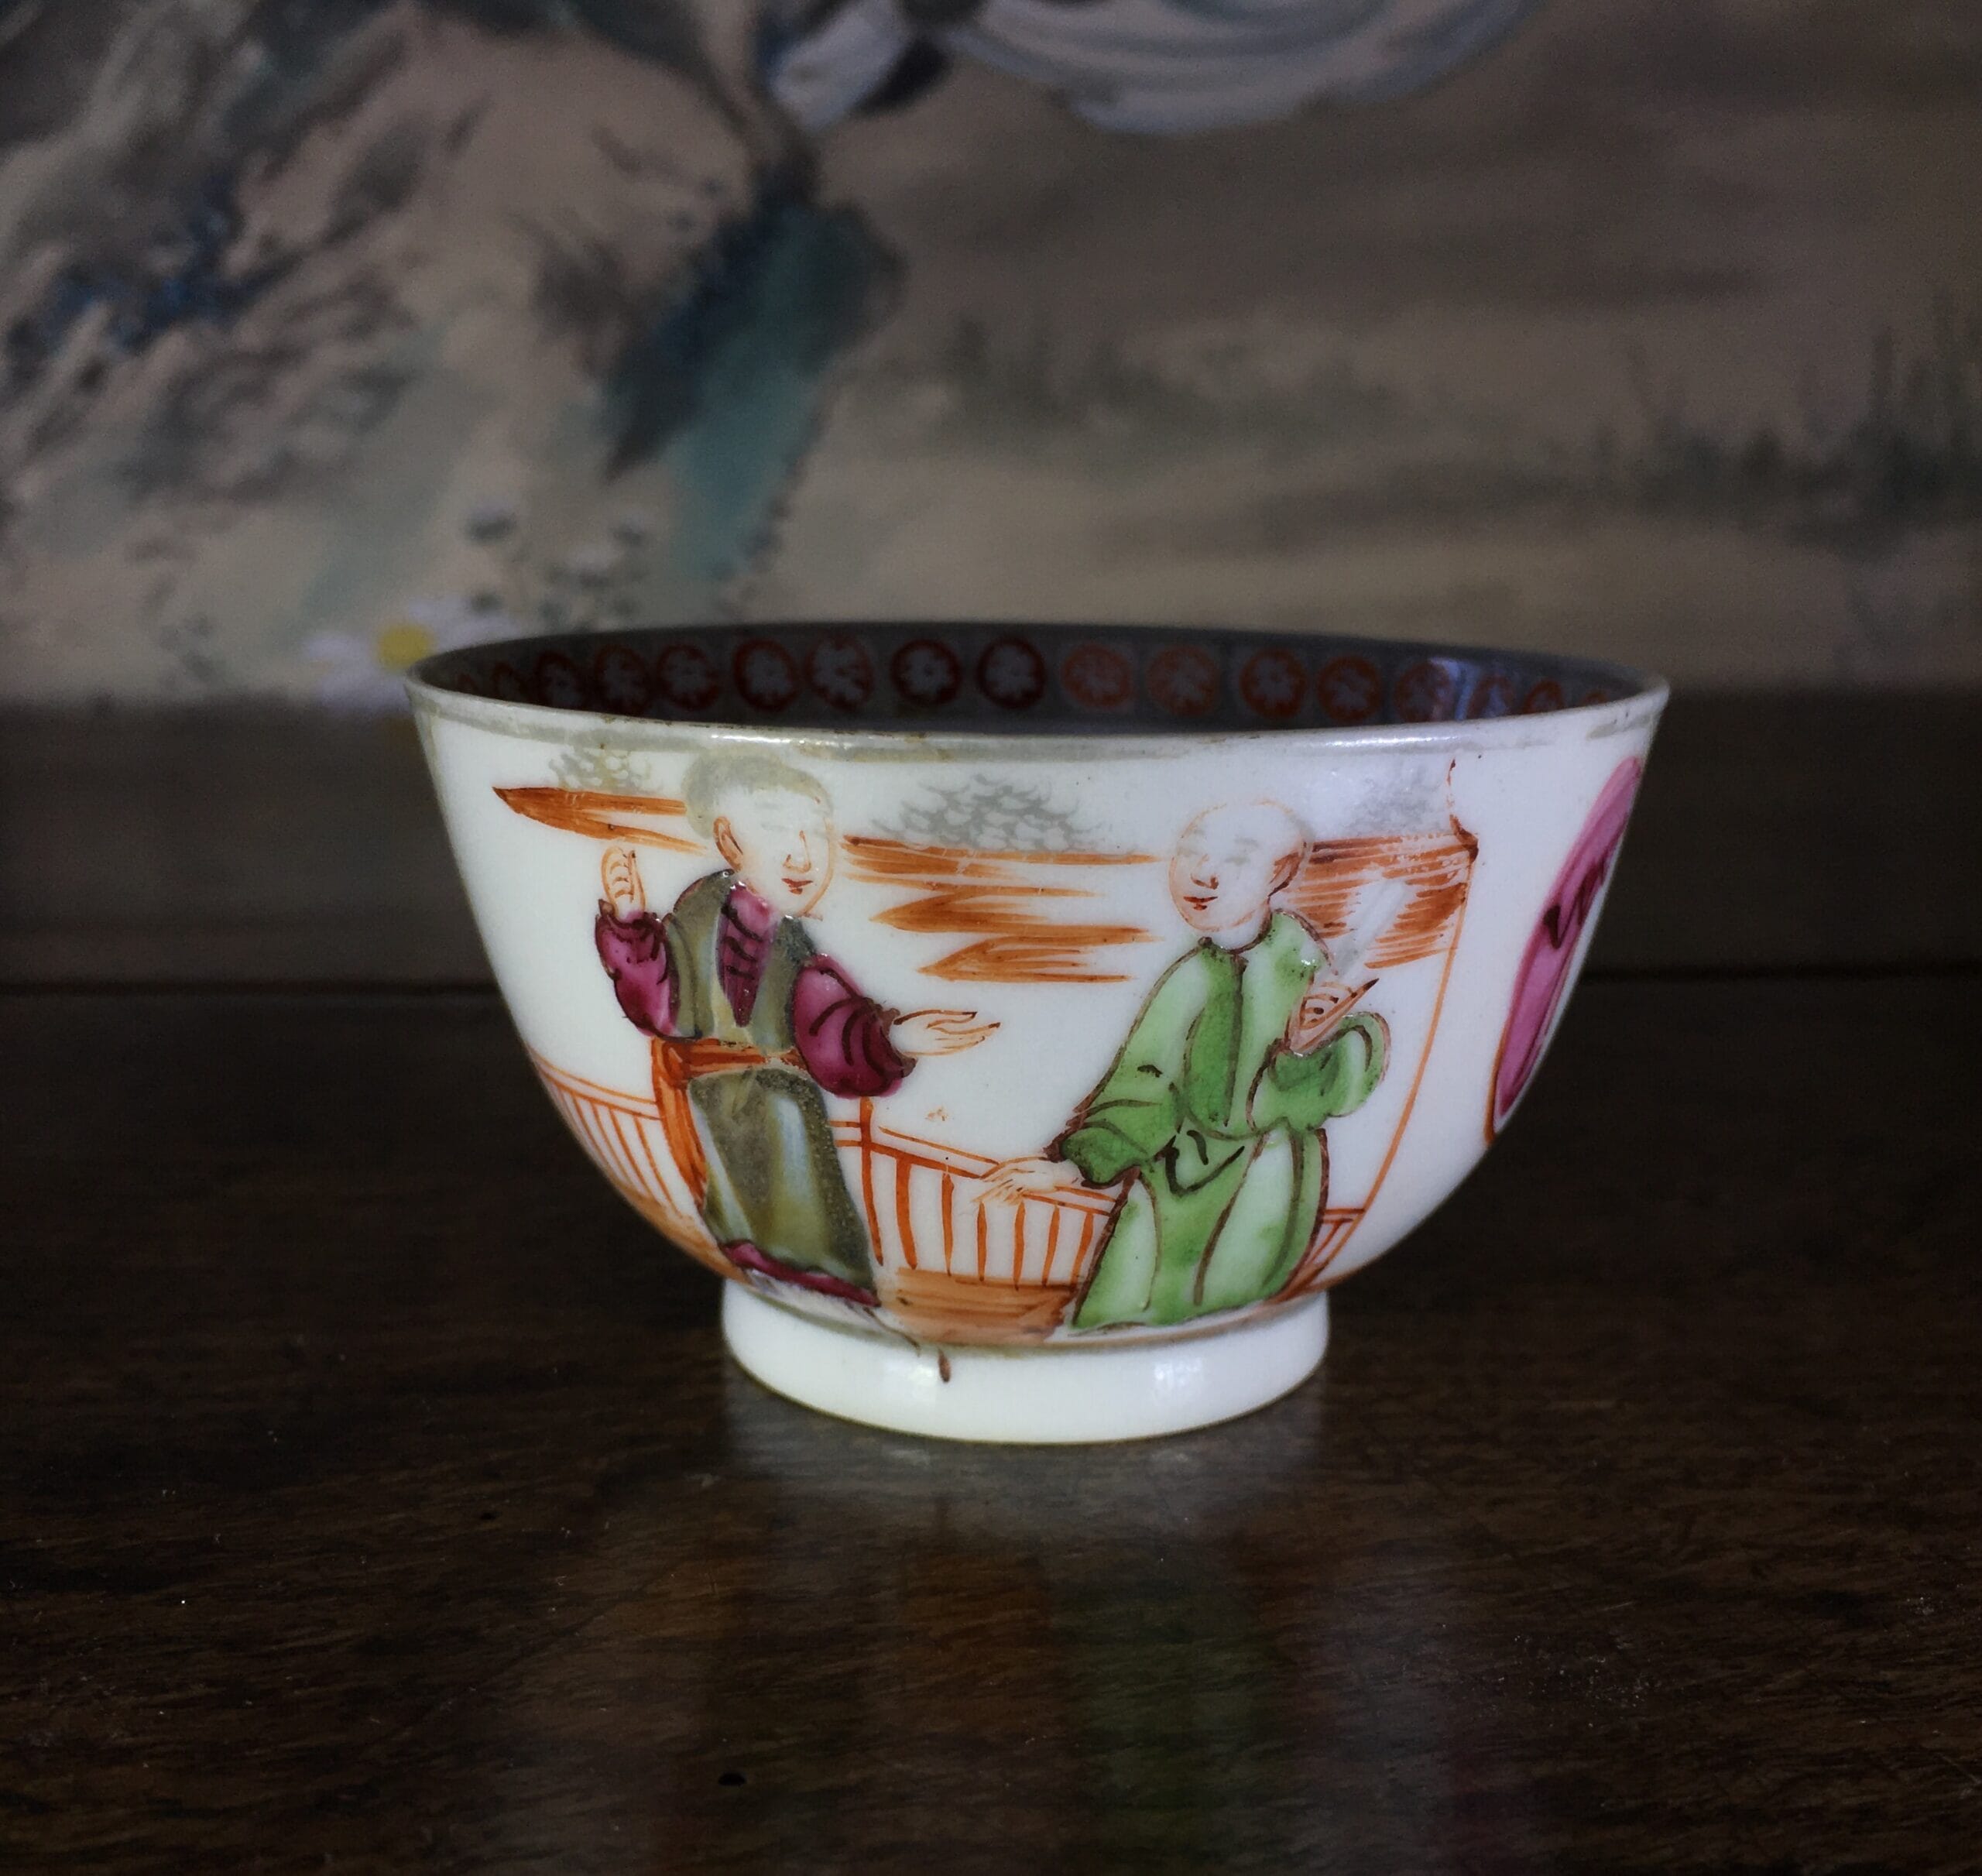 Chinese Export teabowl, polychrome figures, c. 1765-0